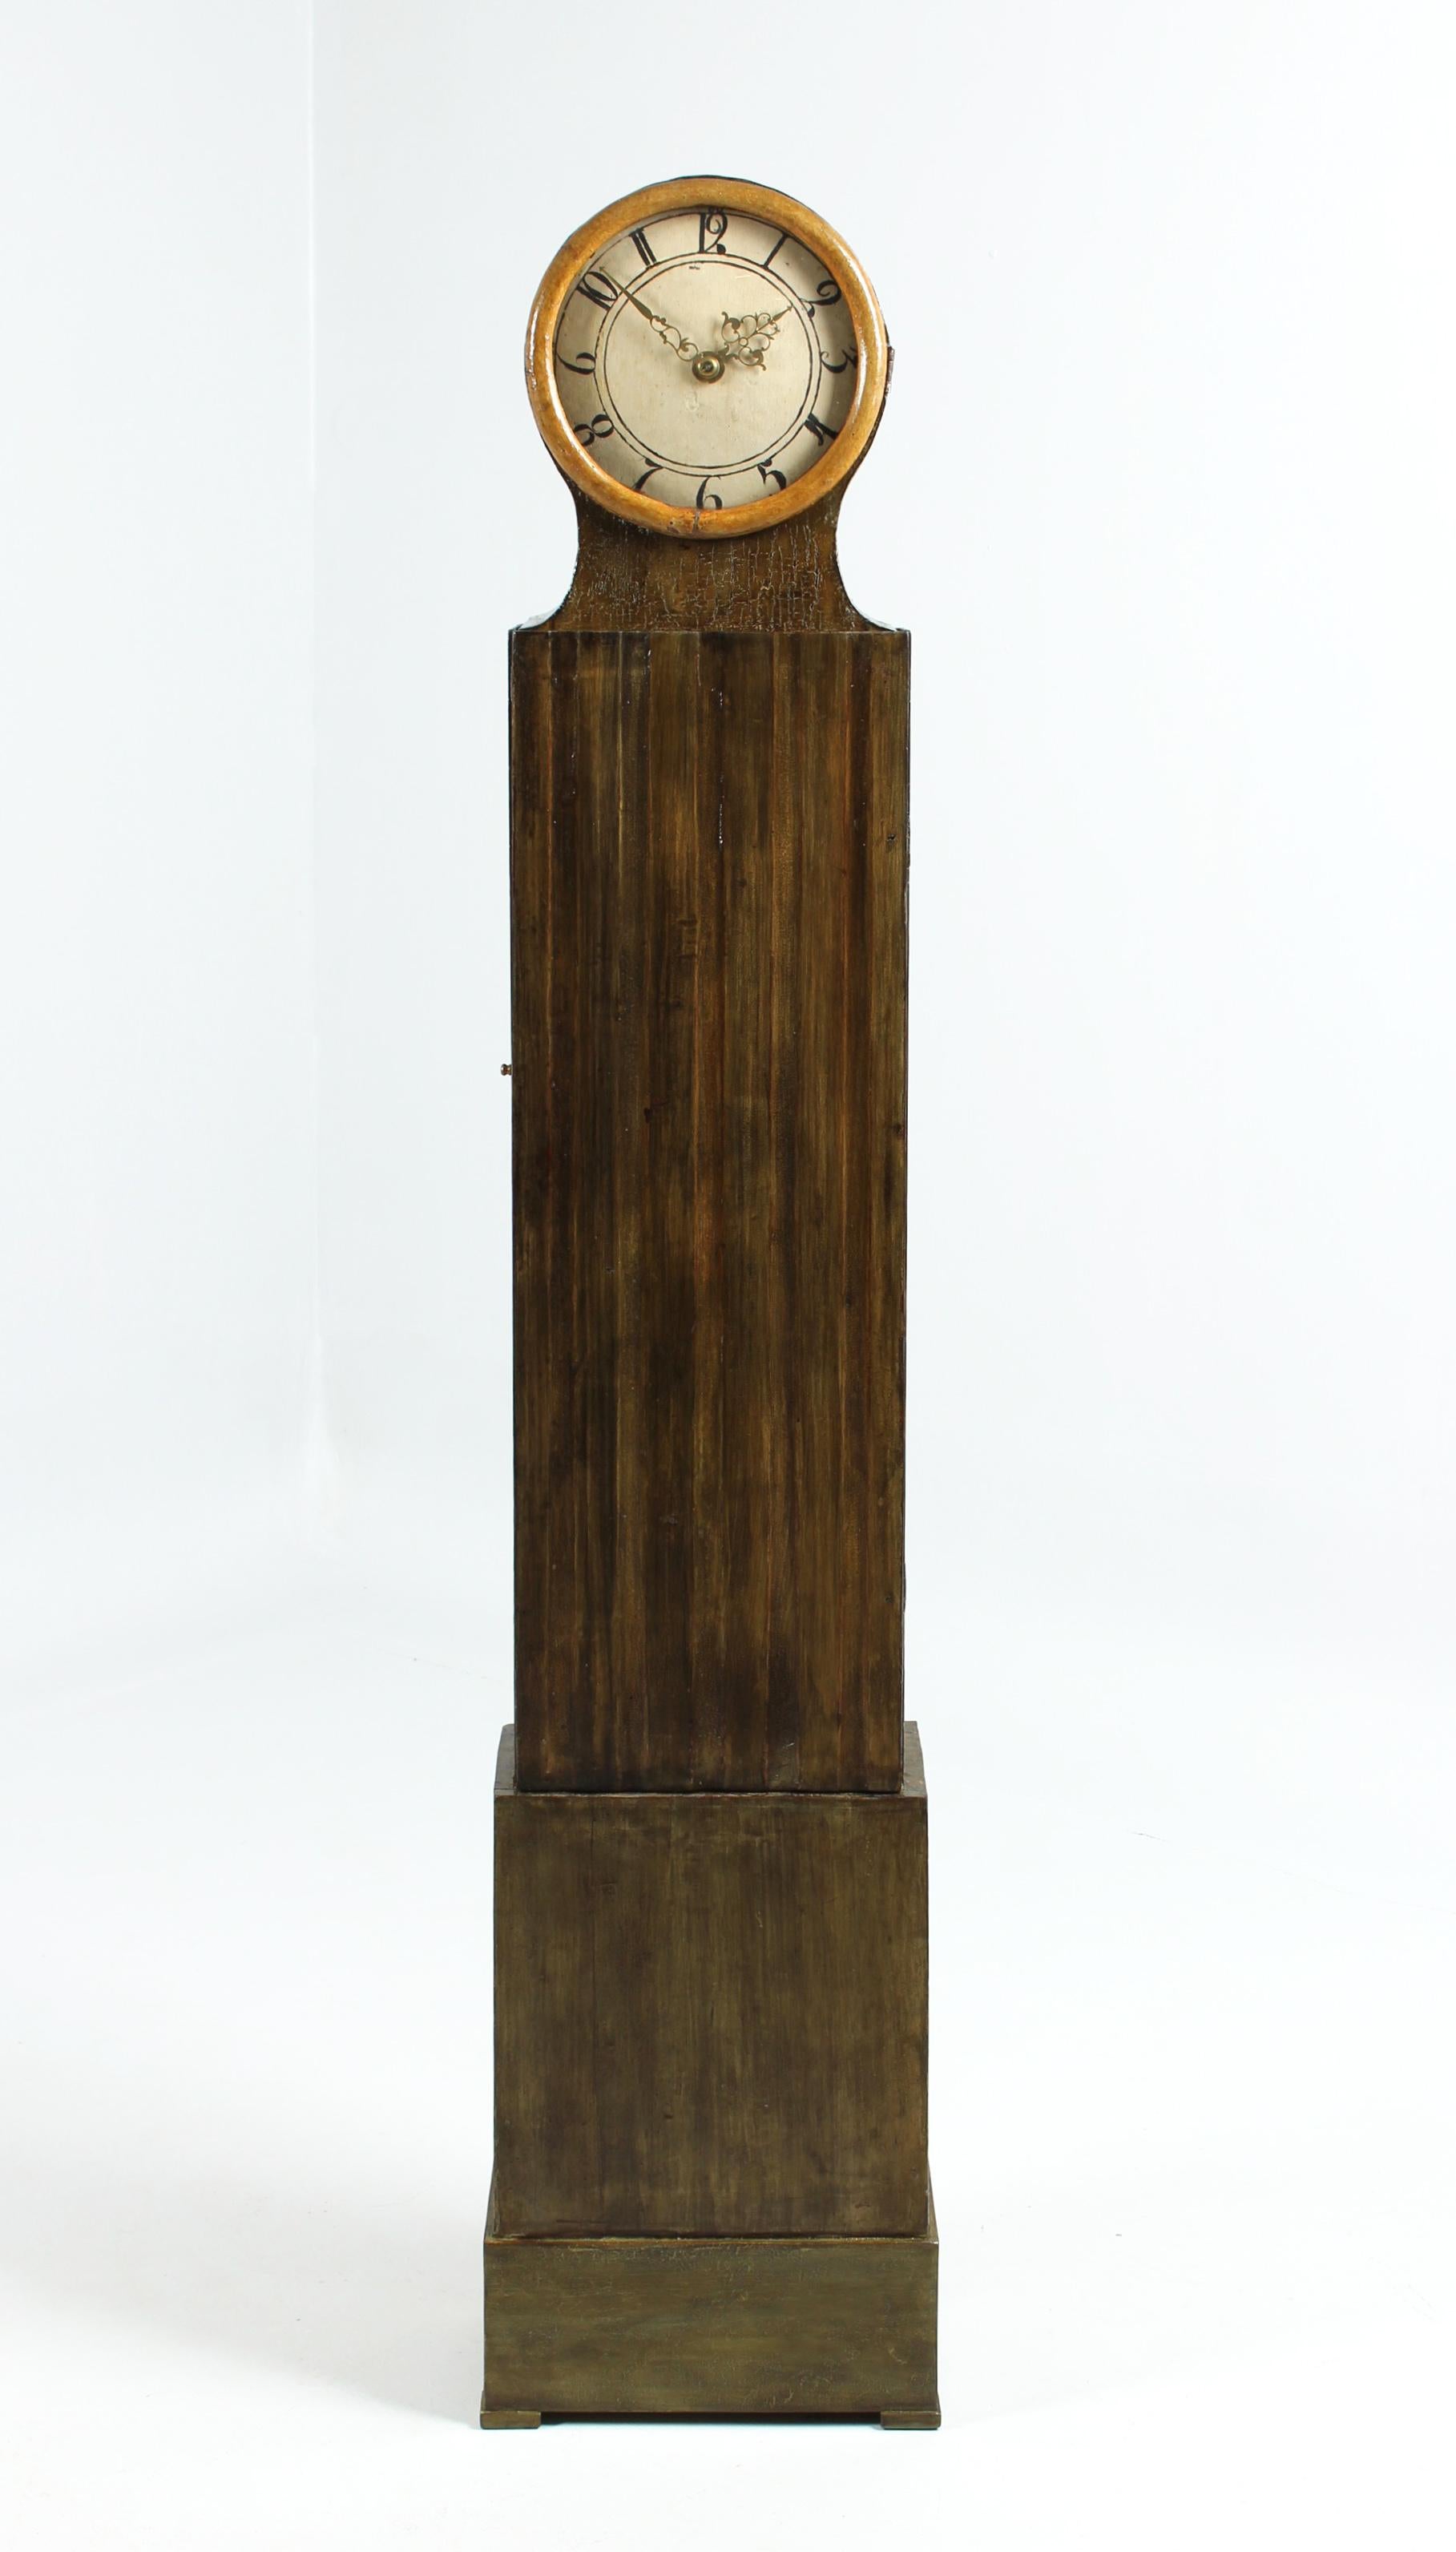 Small Scandinavian grandfather clock

Sweden
Wood, coloured
18th century

Dimensions: H x W x D: 187 x 38 x 21 cm

Description:
Stepped case standing on a plinth.
Straight box with round top. Dark green colour finish. Fluted centre section.
Painted